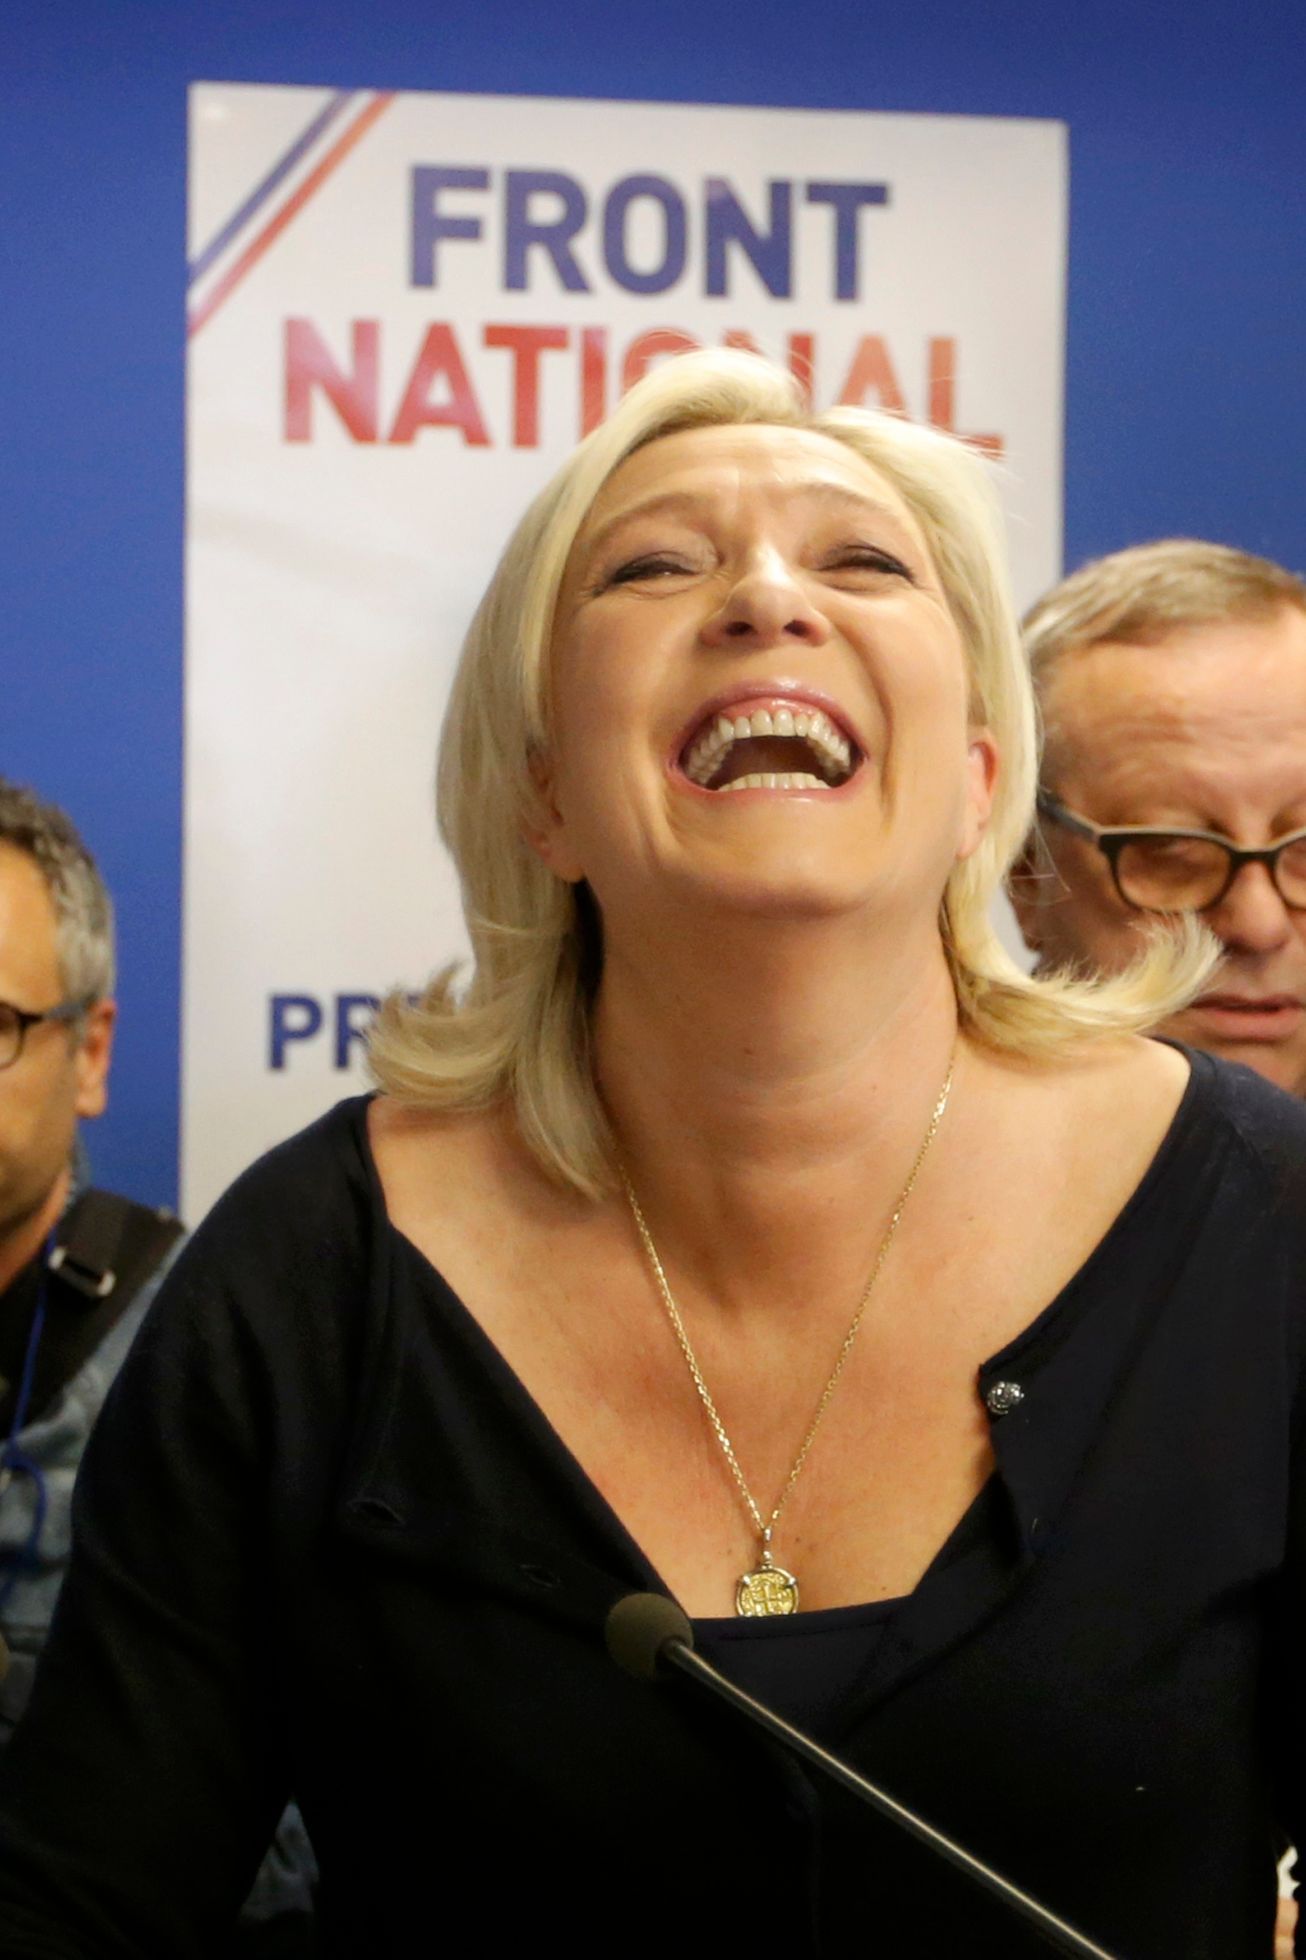 Marine Le Pen, France's National Front political party head, reacts to results after the polls closed in the European Parliament elections at the party's headquarters in Nanterre